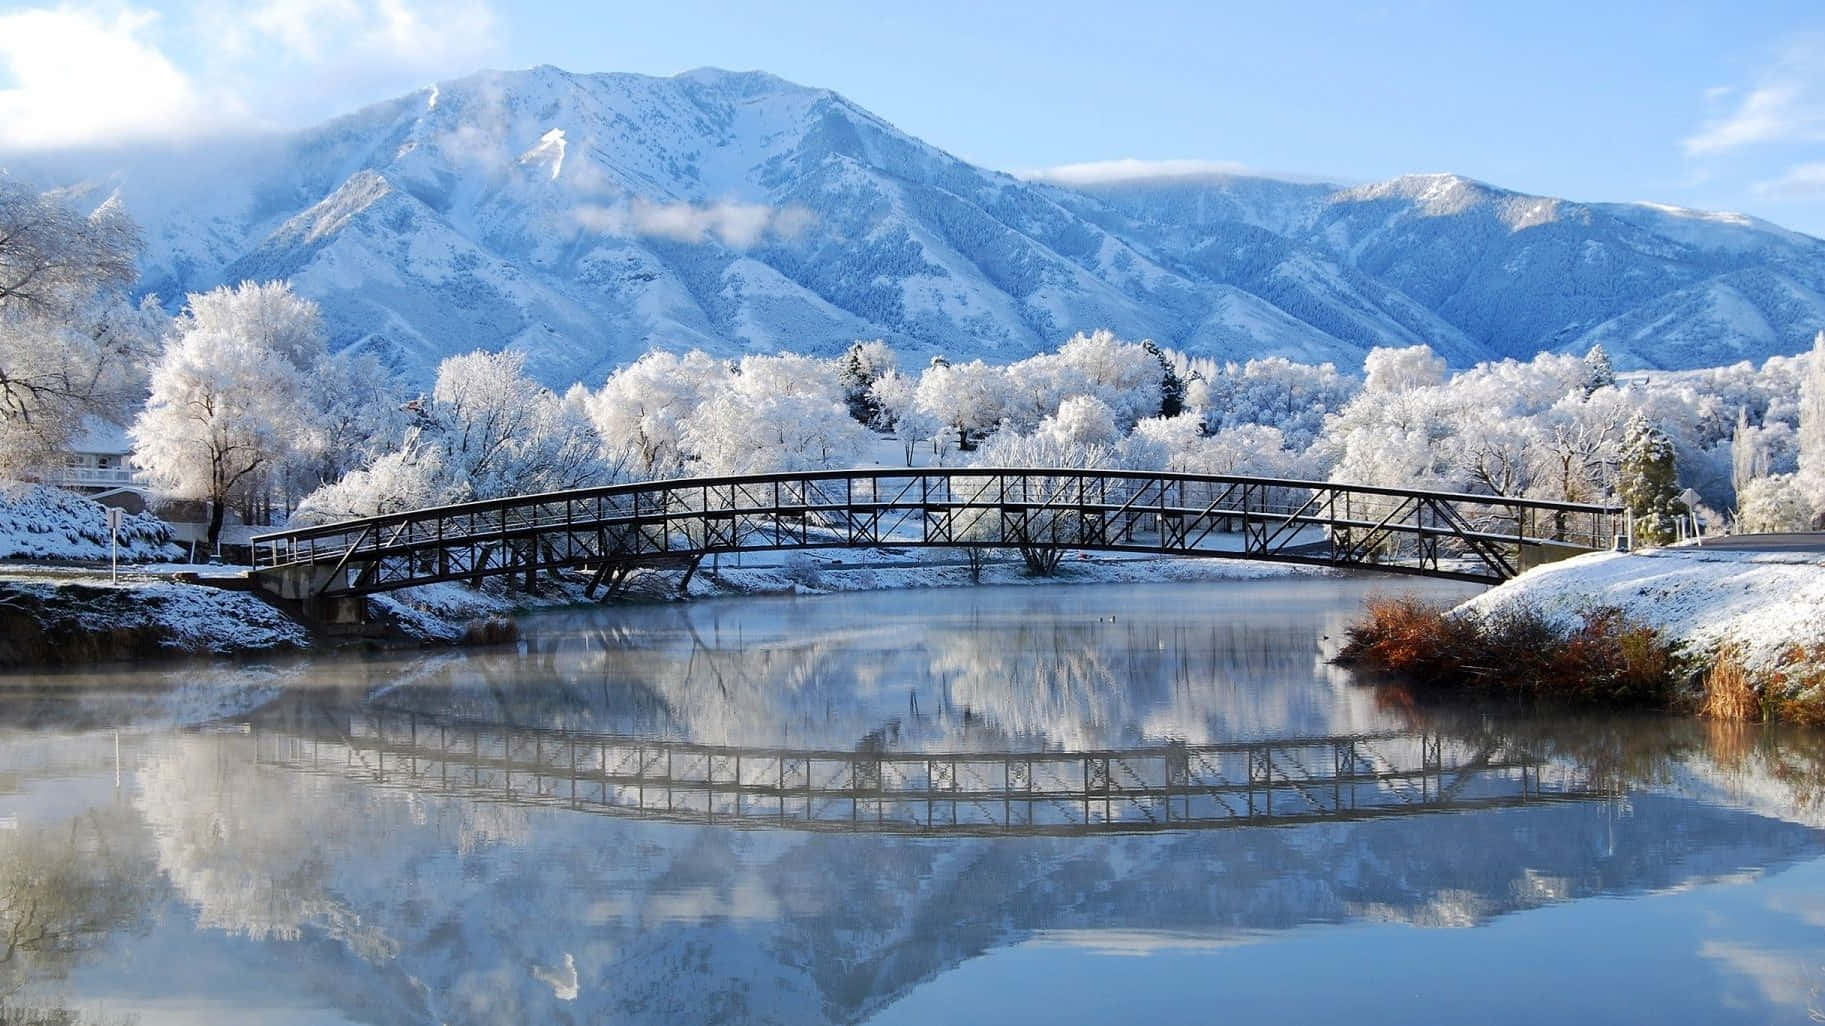 Enjoy the Winter scenery with a crisp 1080p.